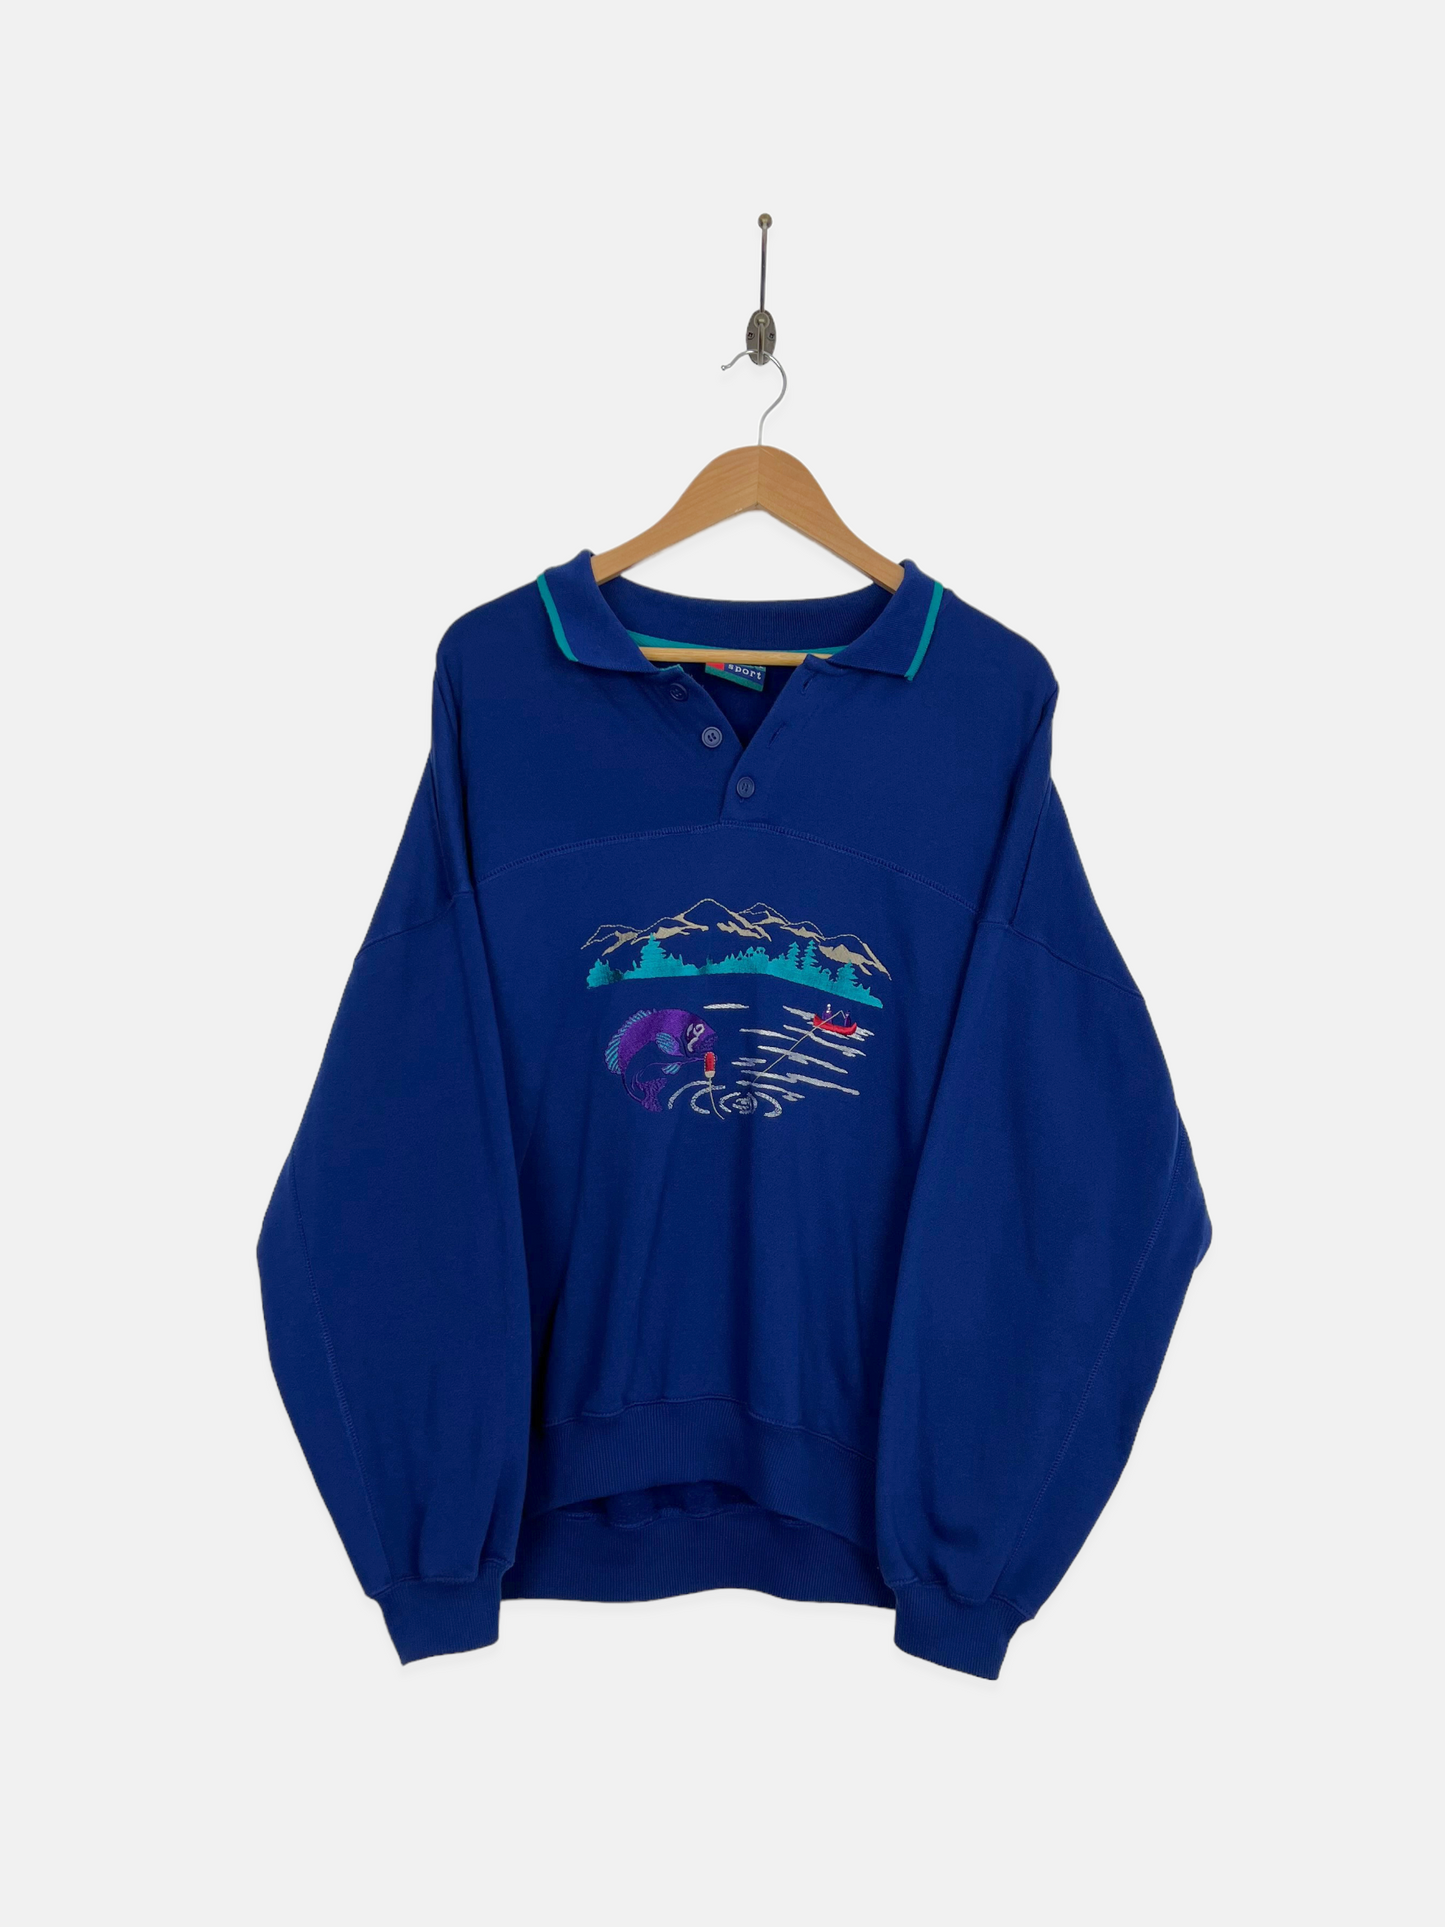 90's Fishing Embroidered Vintage Collared Sweatshirt Size L